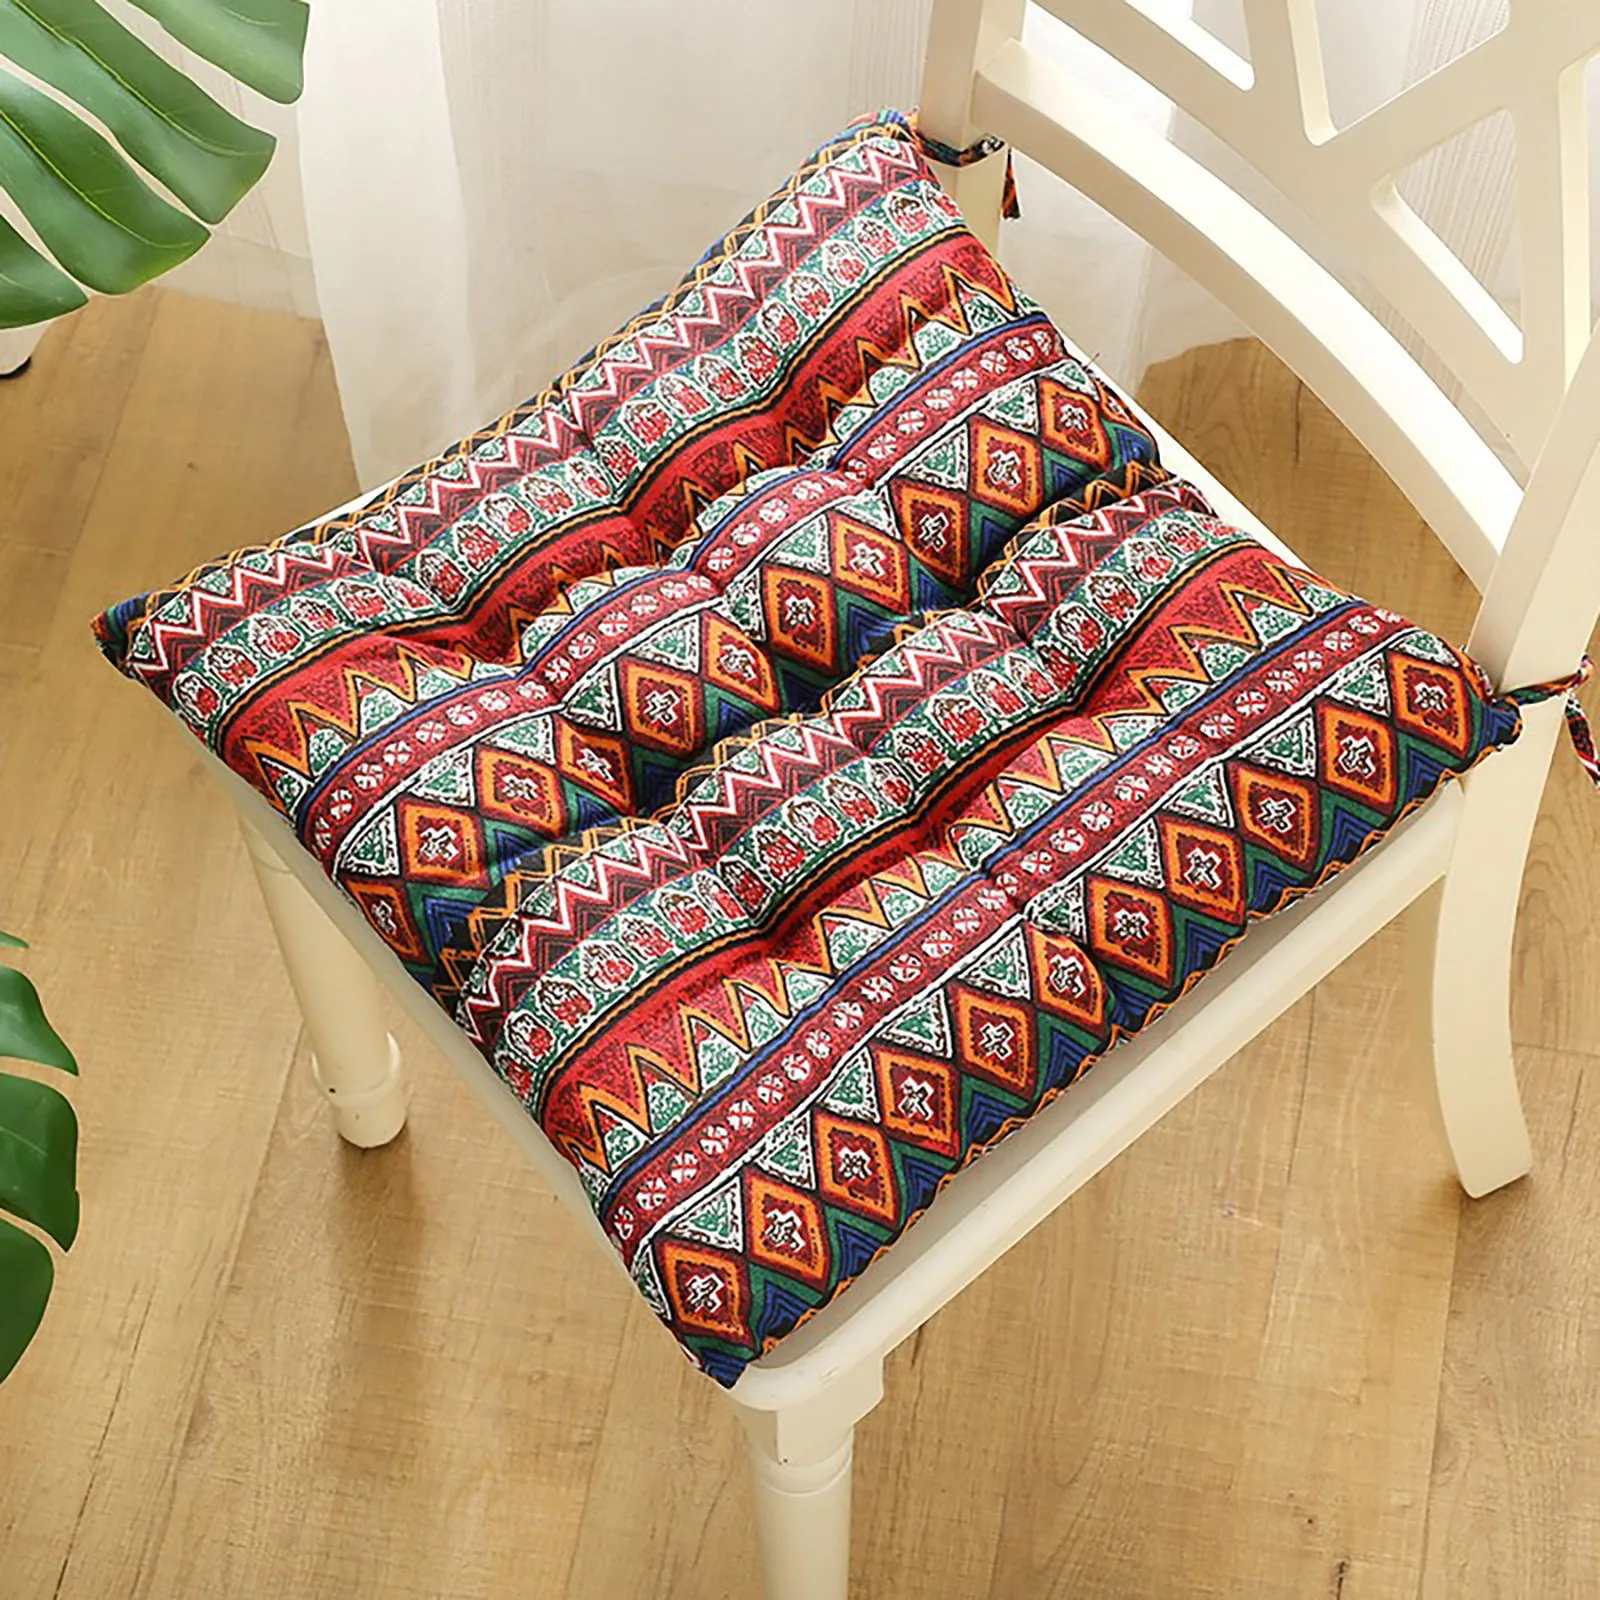 Printed cushions with cushion pad for indoors or outdoors garden seat cushions 